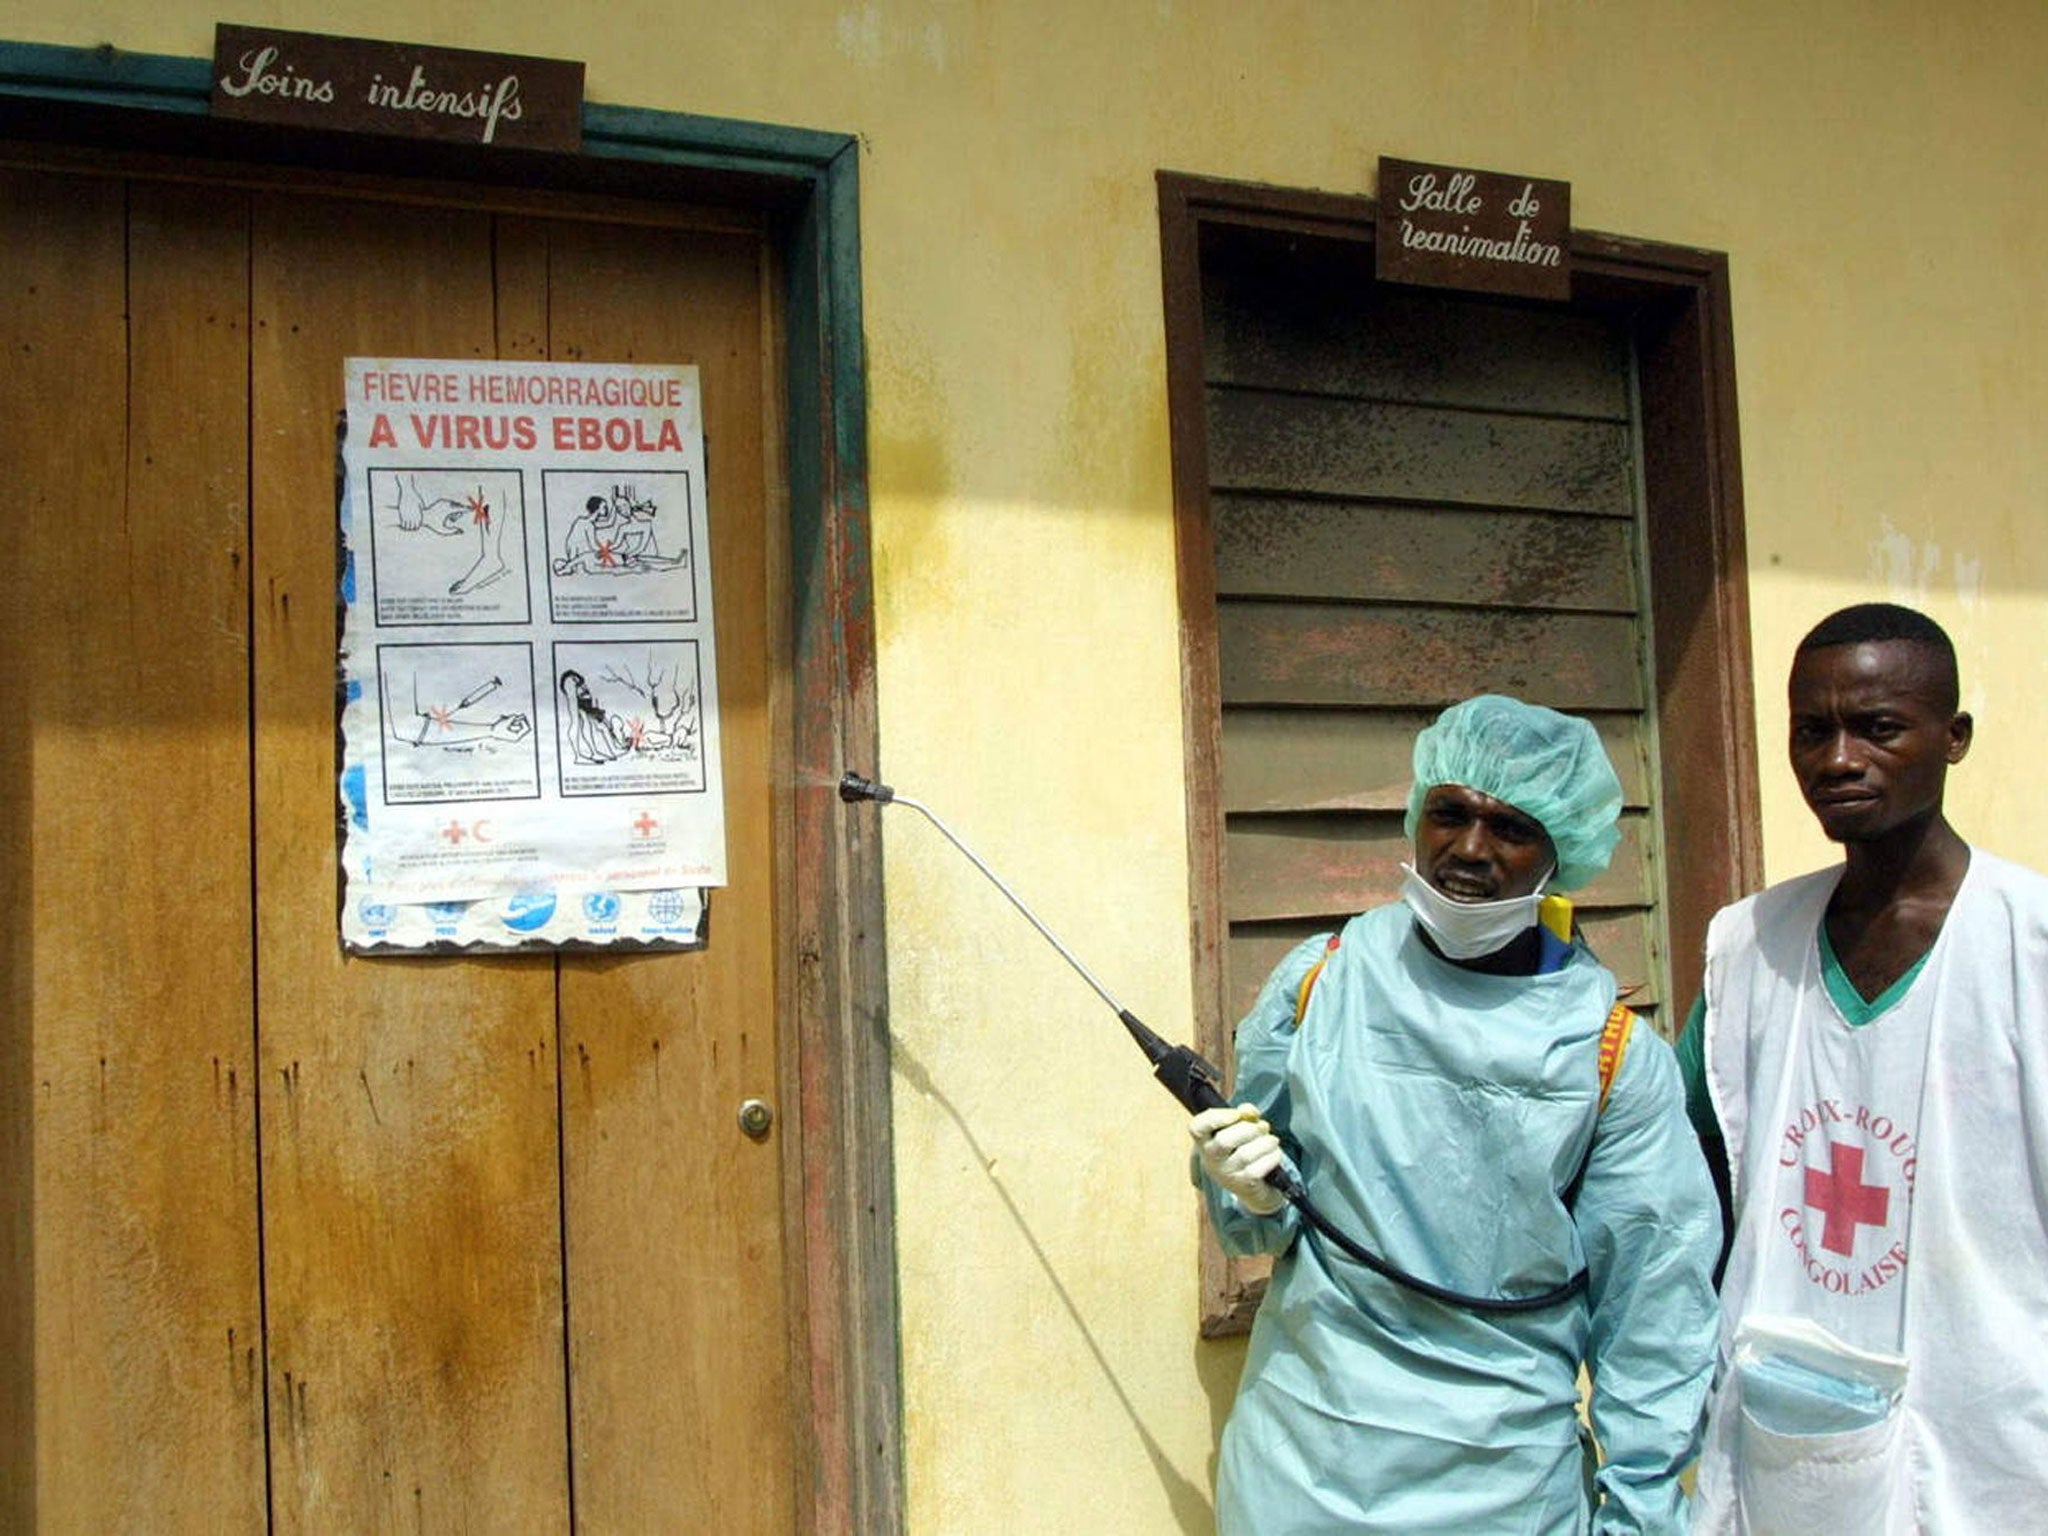 This picture taken on March 9, 2003 shows International Red Cross workers spraying disinfectant around the Intensive Care room at Kelle hospital, northwestern Congo, where an Ebola fever infected patient lies. An Ebola epidemic which has already killed do